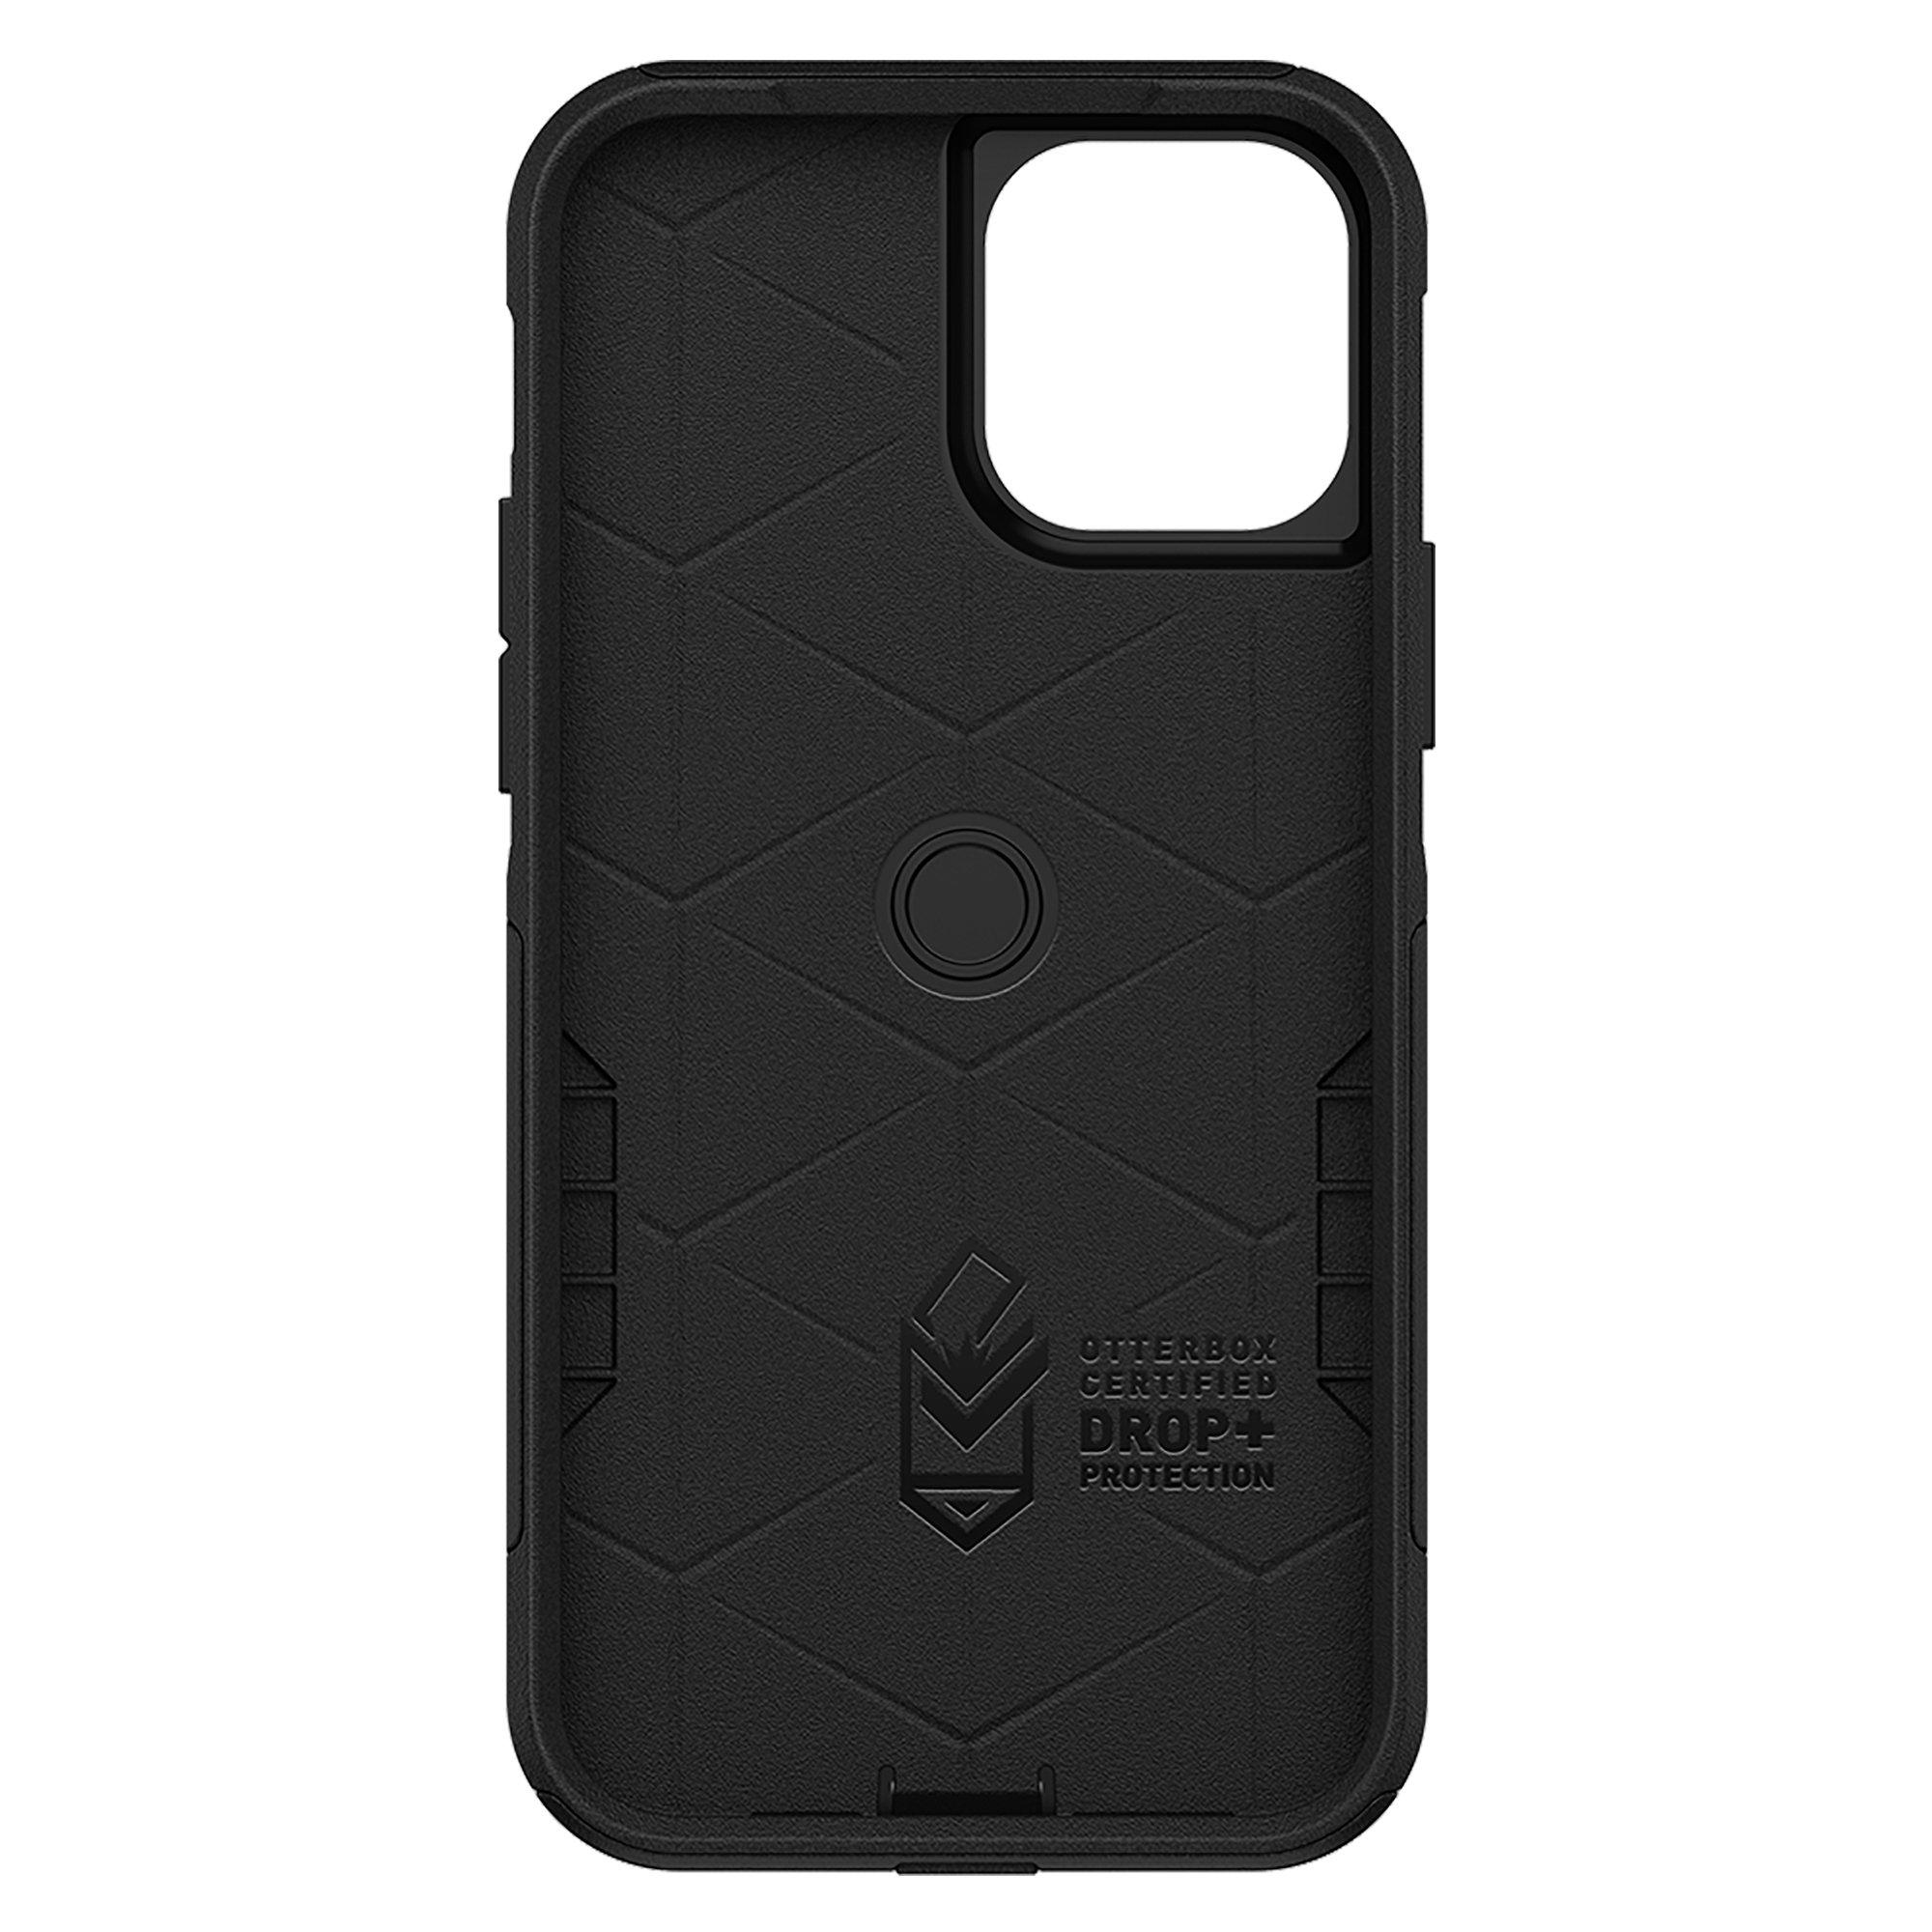 OtterBox Commuter Antimicrobial Case for iPhone iPhone 12/12 Pro